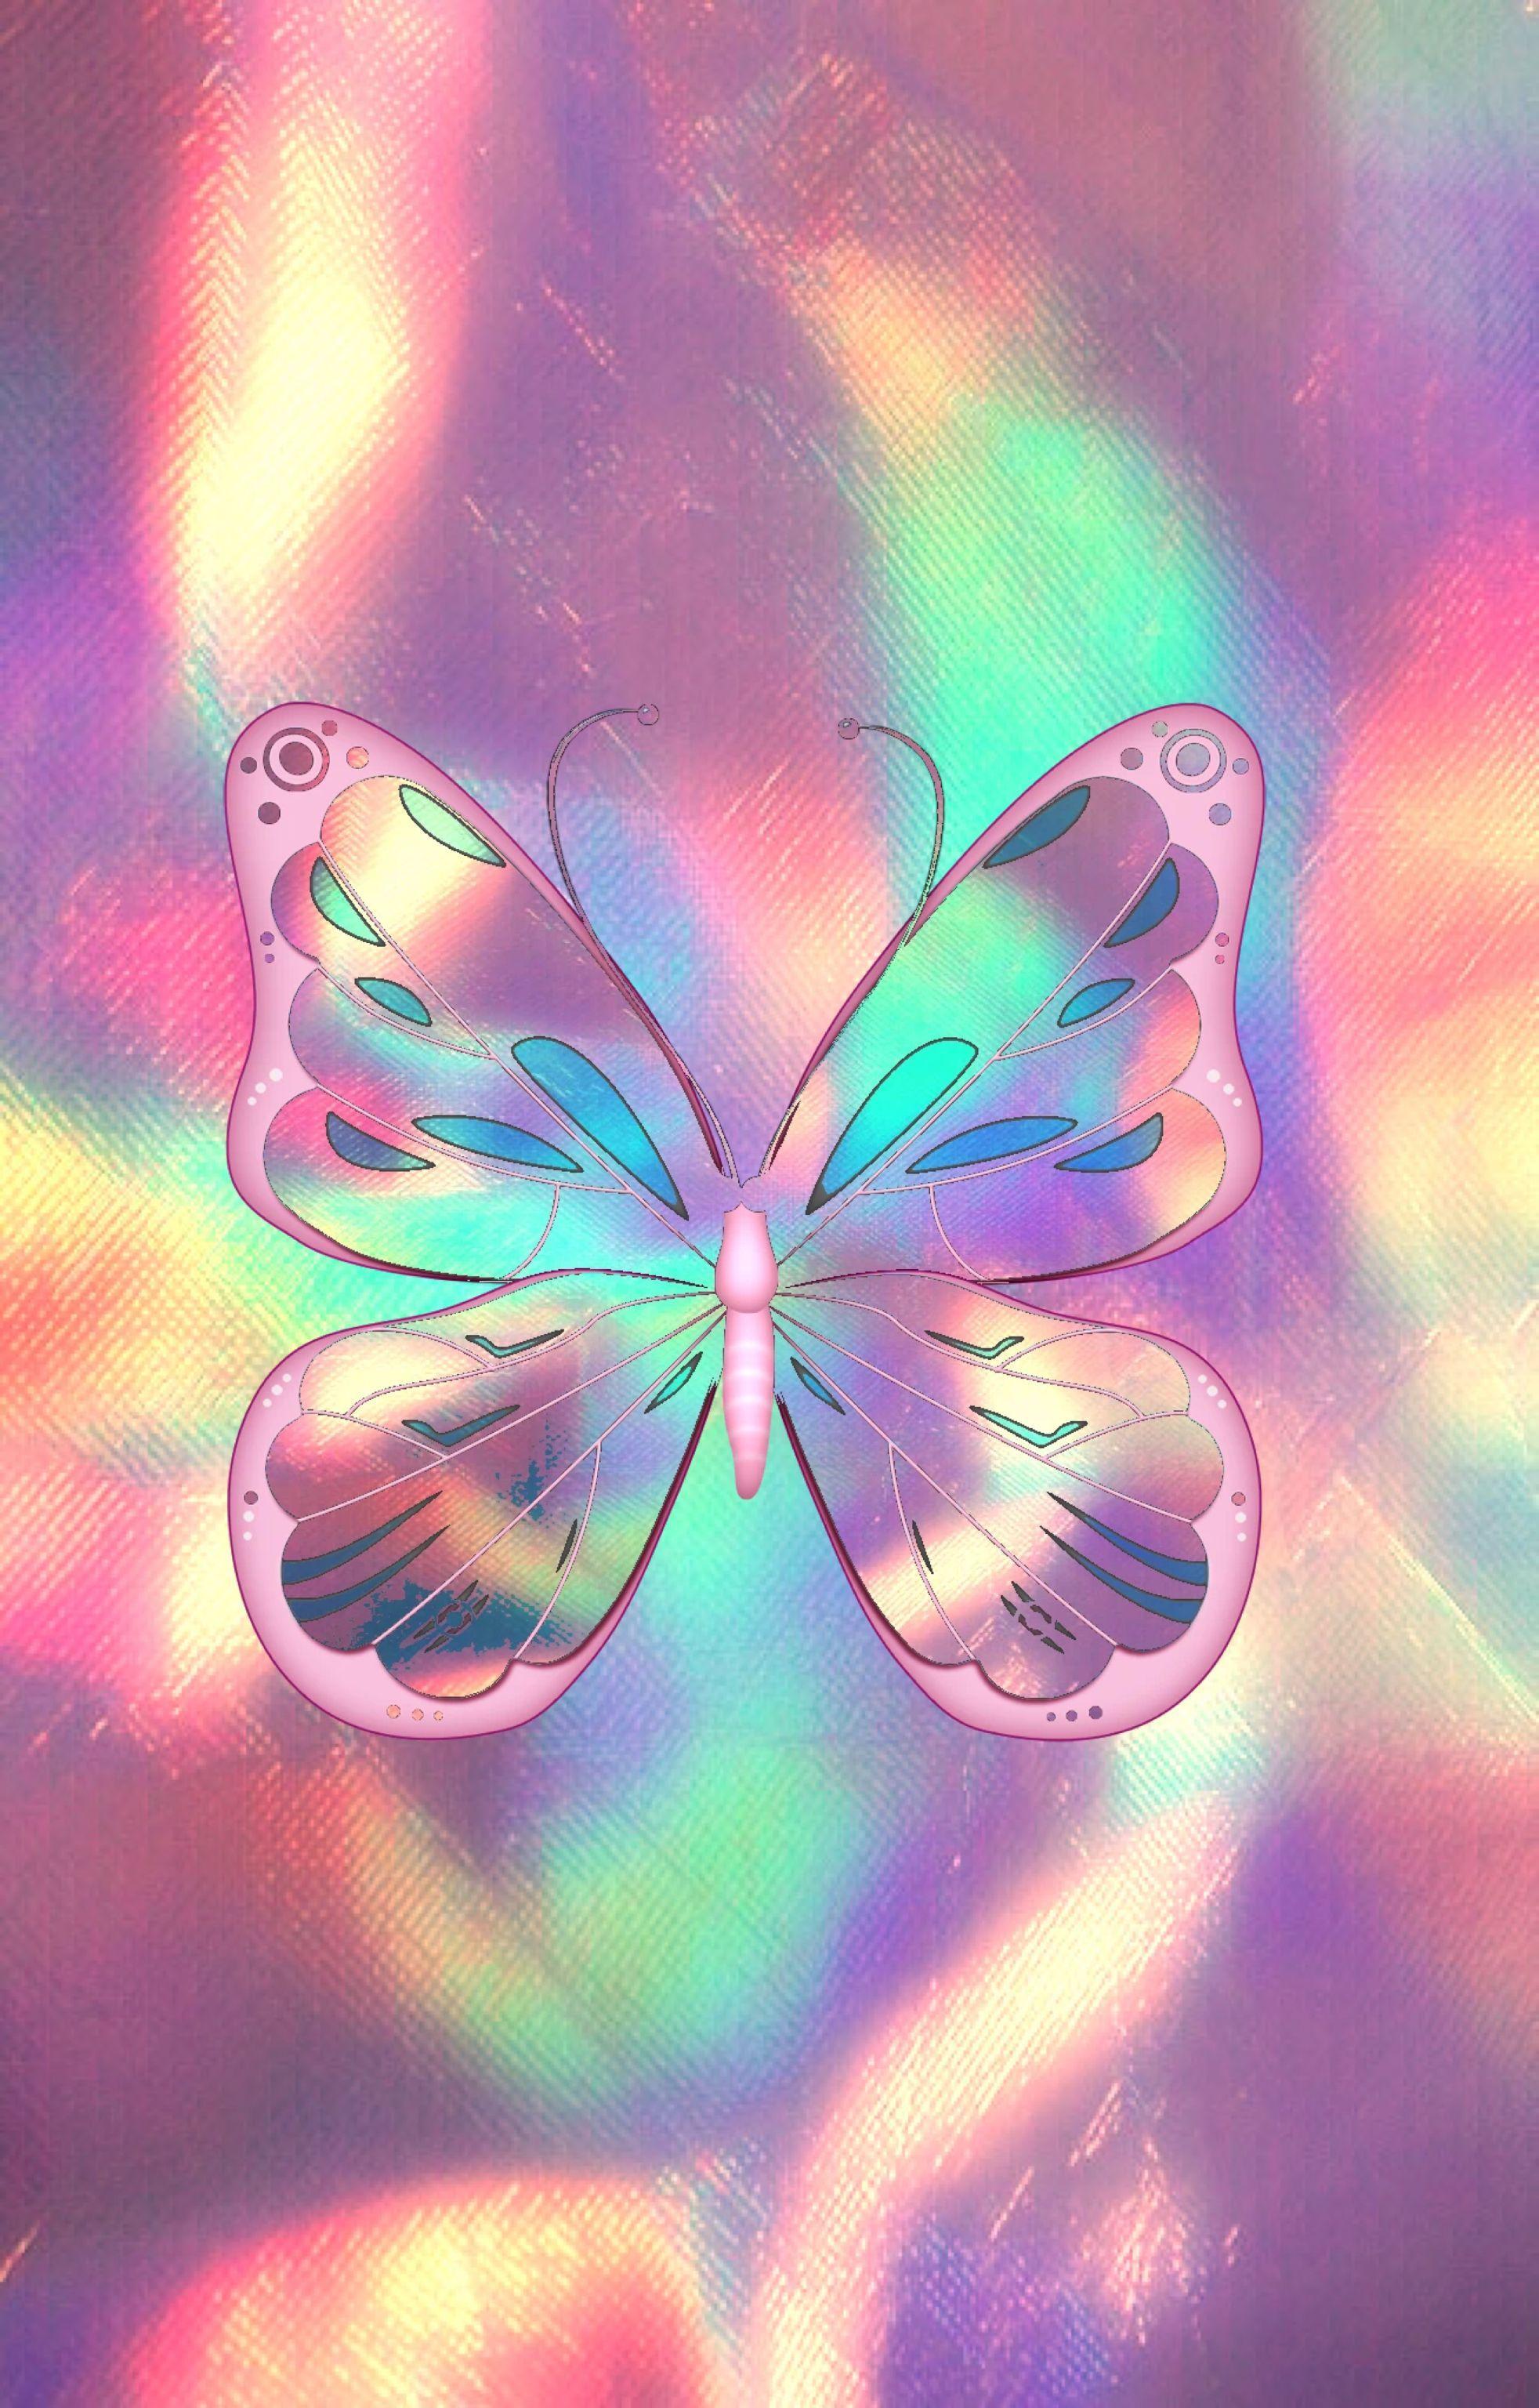 Plying With A Butterfly Wallpapers - Wallpaper Cave